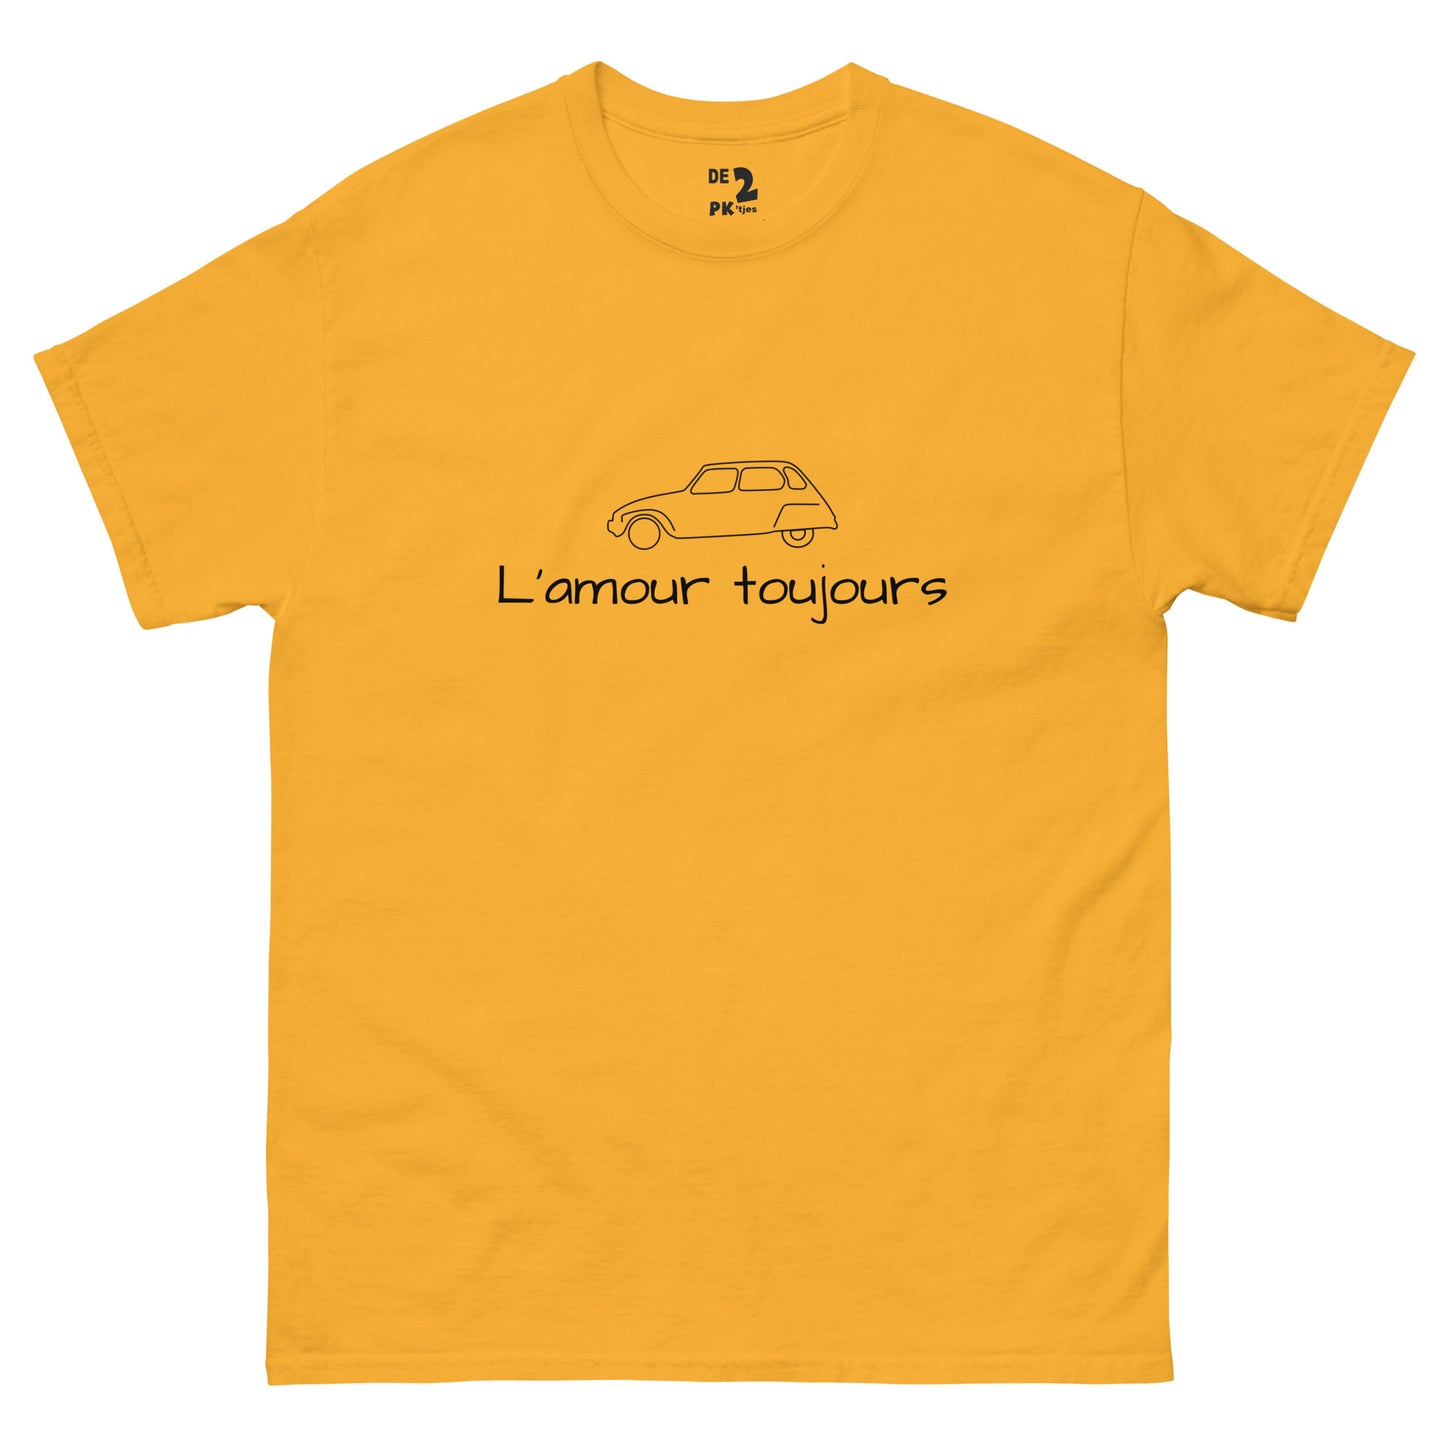 T-shirt Citroën Dyane L'amour Toujours - Red, Blue, Orange, Yellow, Sand or White